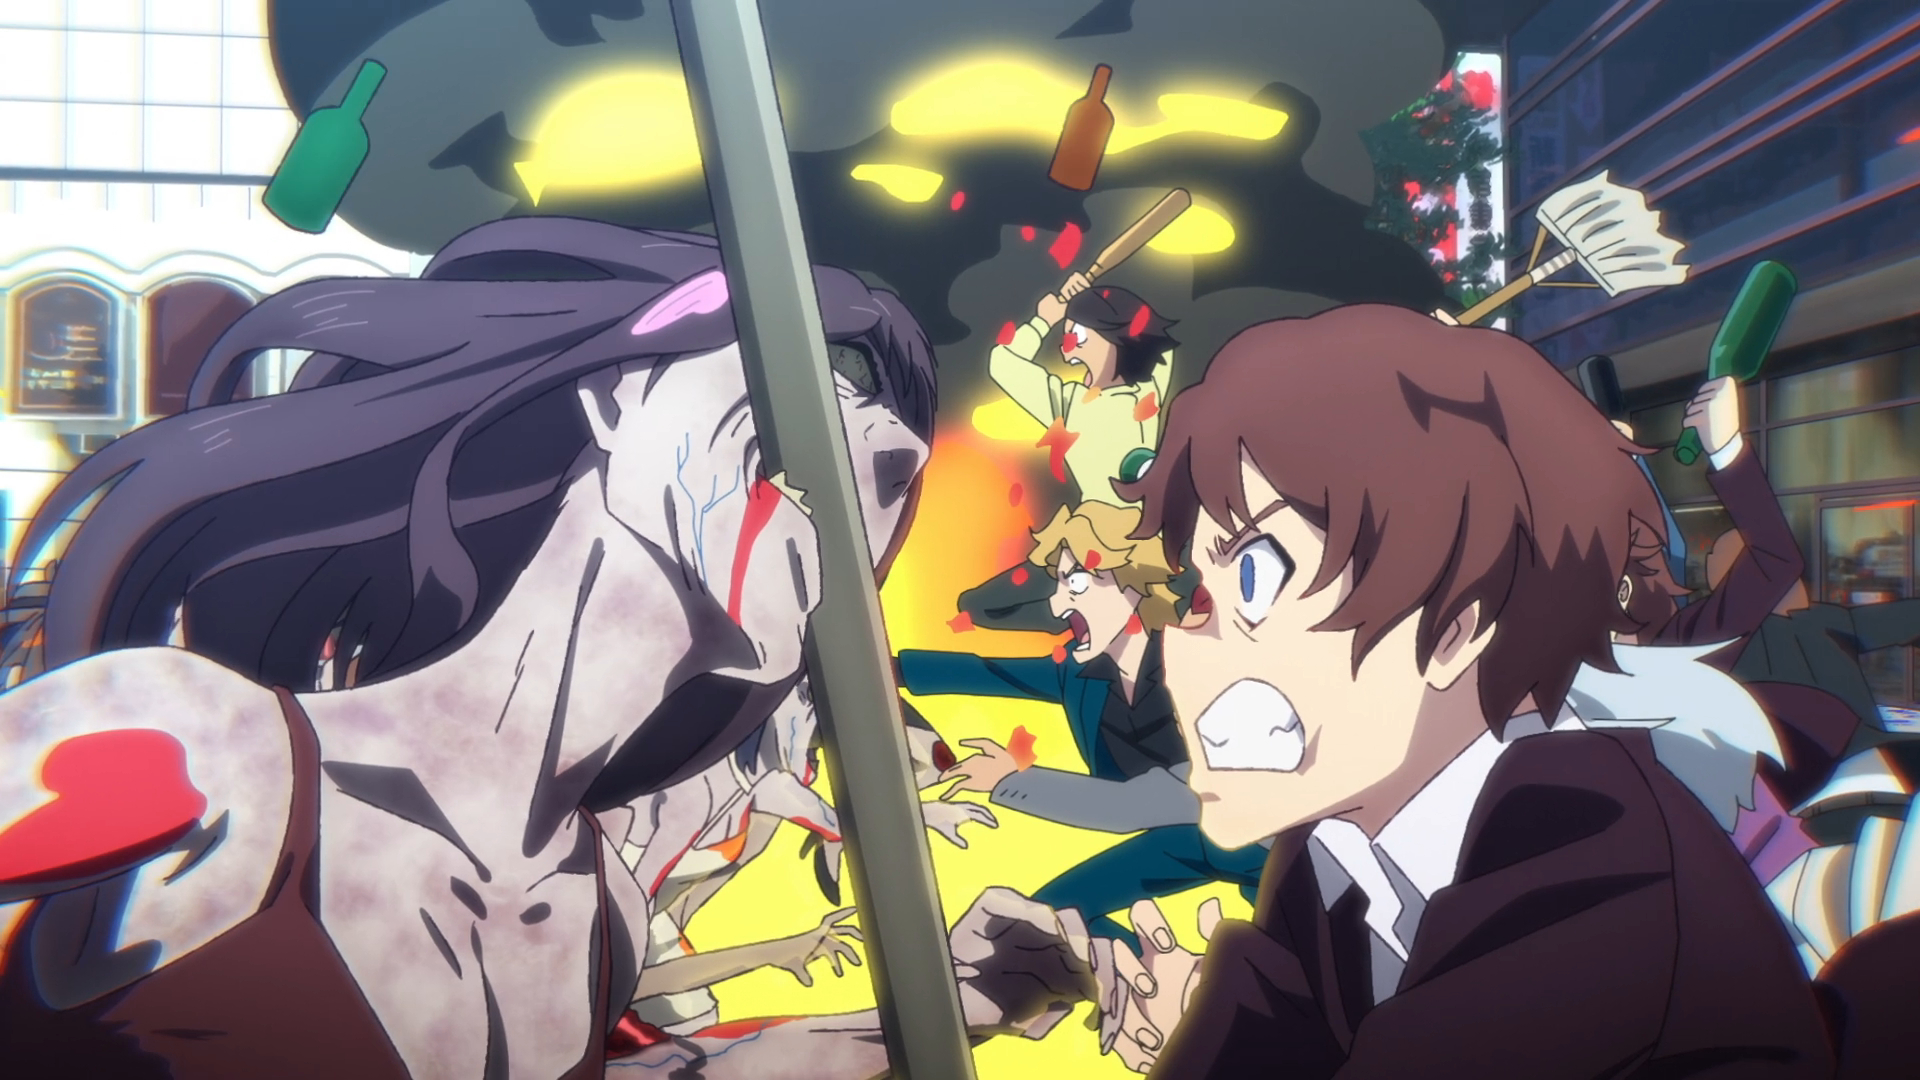 Best 8 Zombie Anime To Watch Right Now - Anime Corner